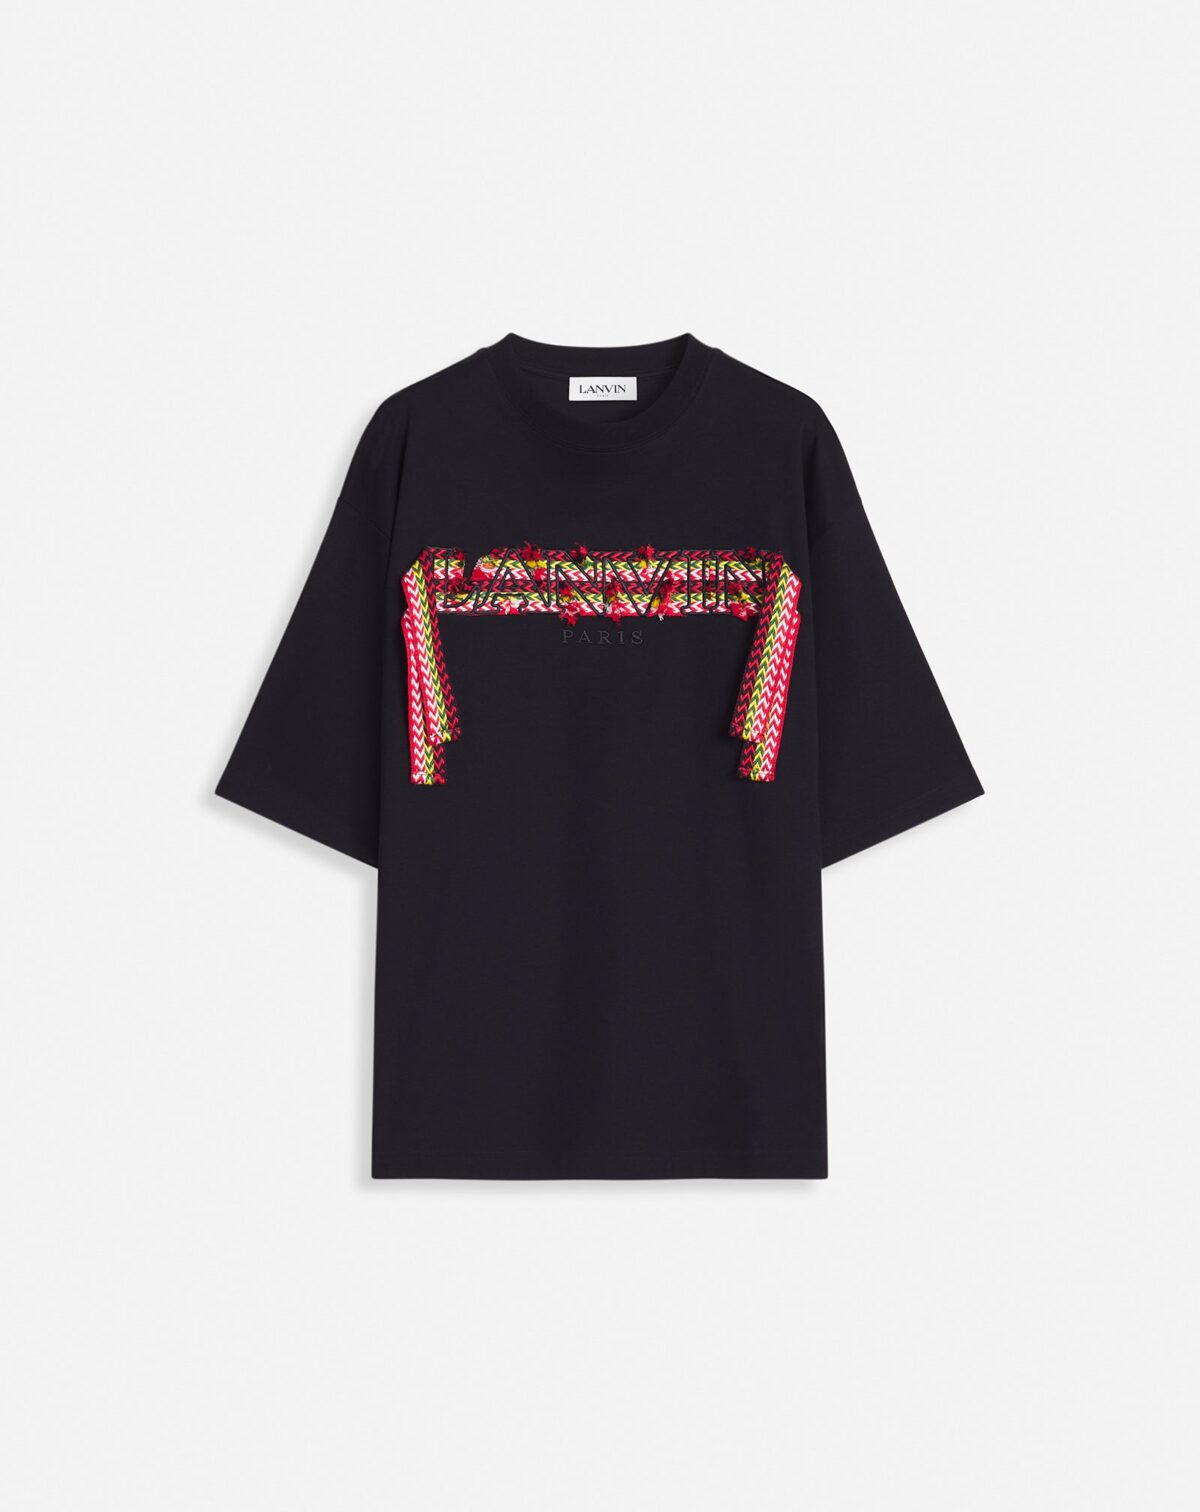 CURB LANVIN EMBROIDERED OVERSIZED T-SHIRT